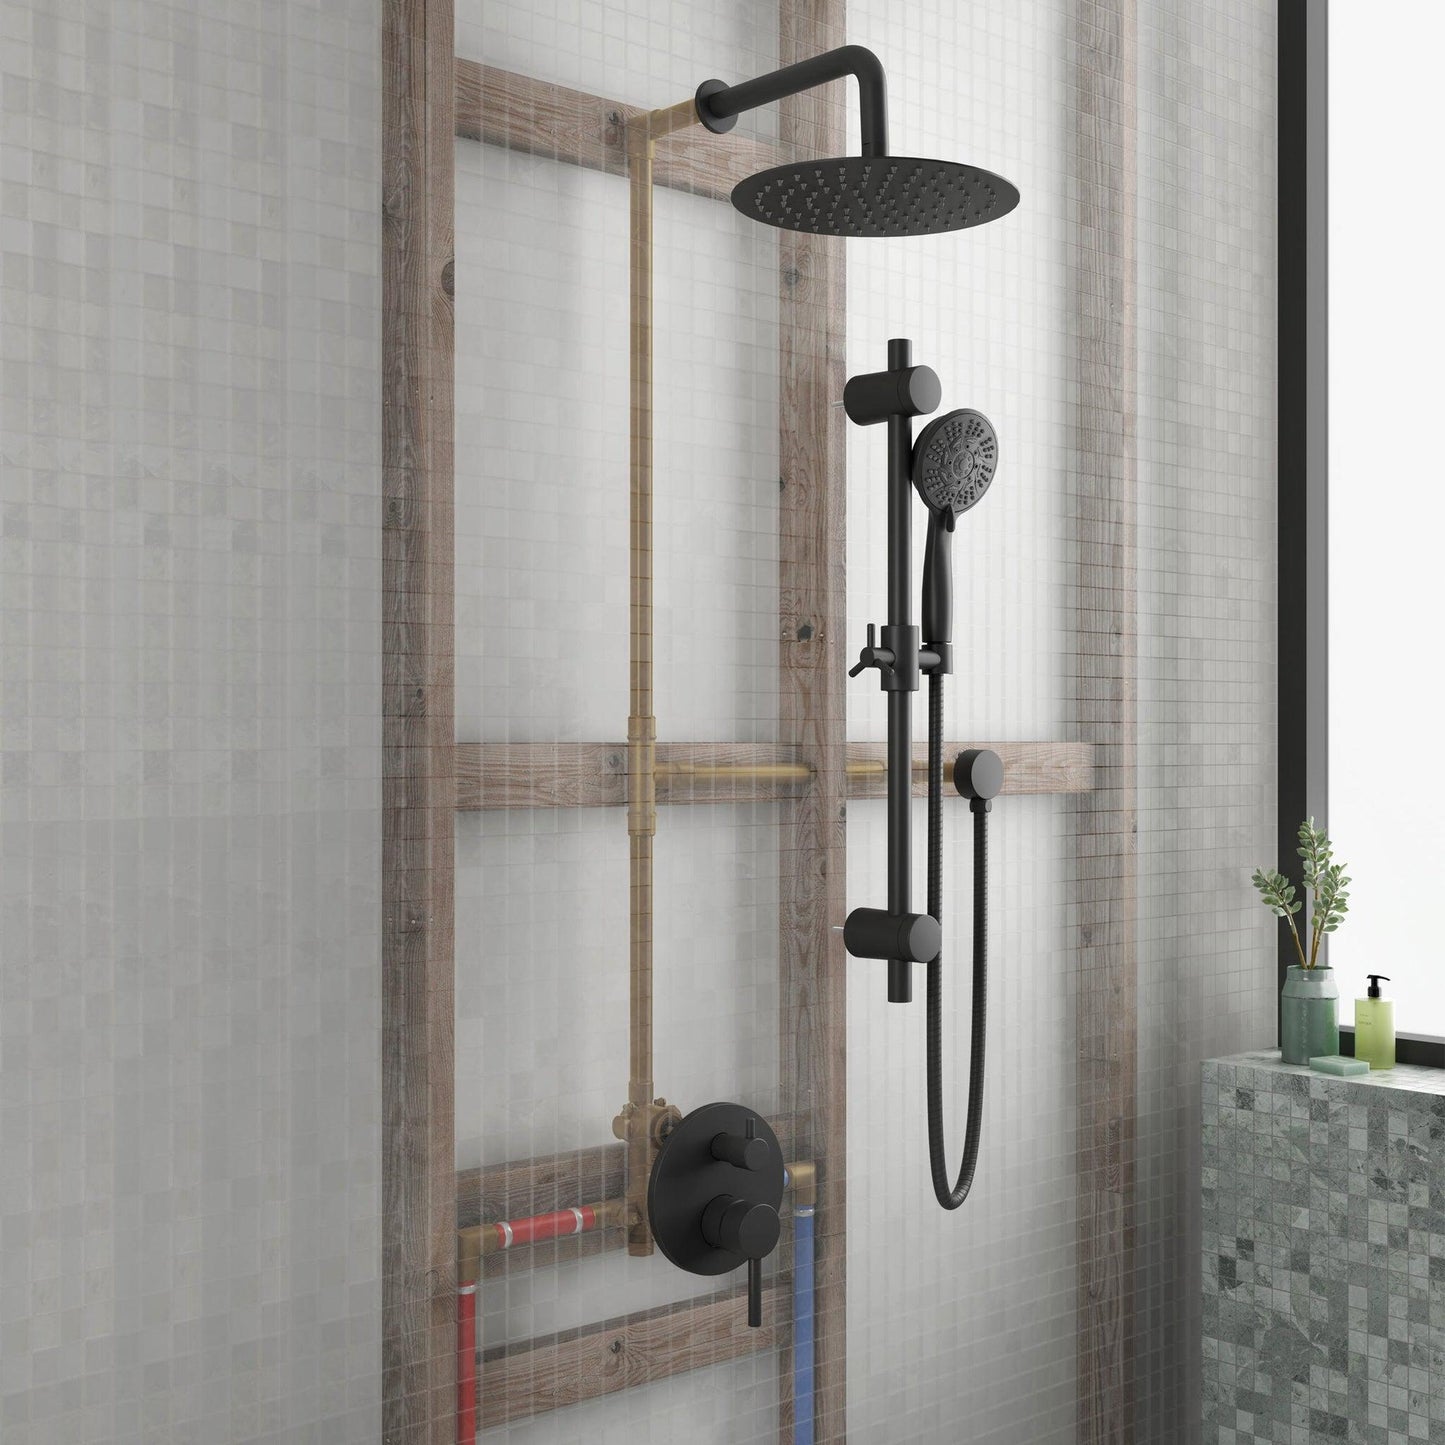 PULSE ShowerSpas Refuge Rain Shower Head 5-Function Hand Shower 2.5 GPM Shower System Combo in Oil Rubbed Bronze Finish